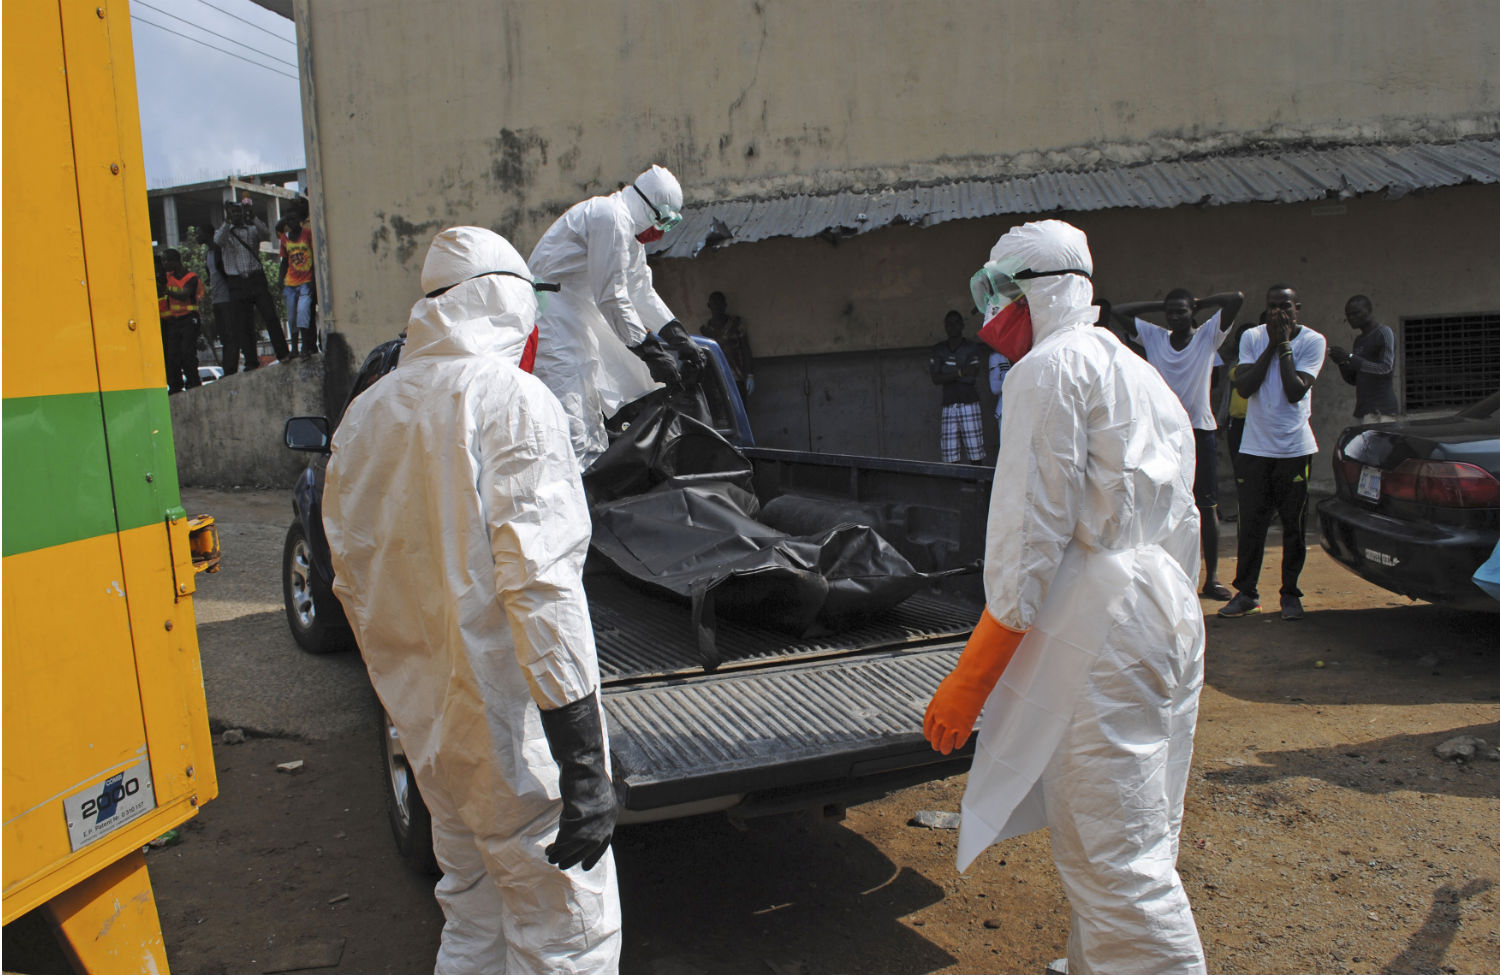 Why Liberians Thought Ebola Was a Government Scam to Attract Western Aid